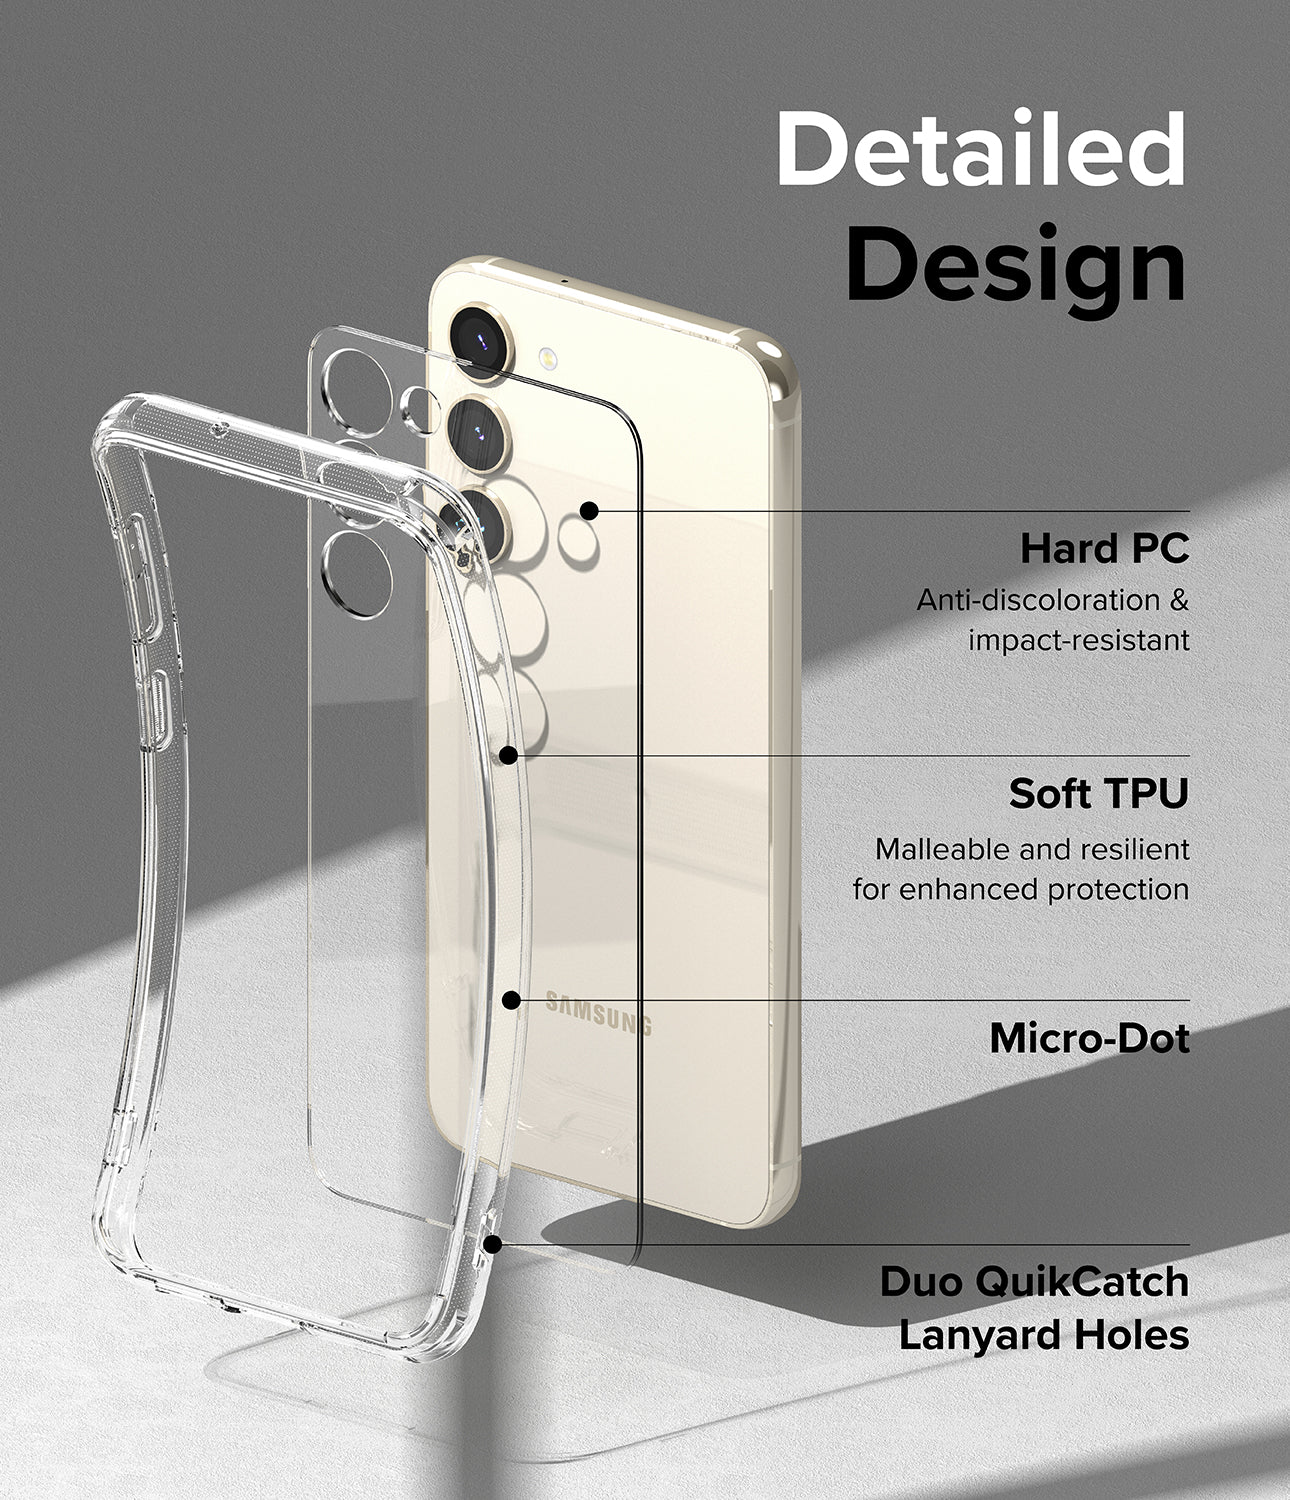 Galaxy S23 Plus Case | Fusion Clear - Detailed Design. Anti-discoloration and impact-resistant with Hard PC. Malleable and resilient for enhanced protection with Soft TPU. Micro-Dot. Duo QuikCatch Lanyard Holes.